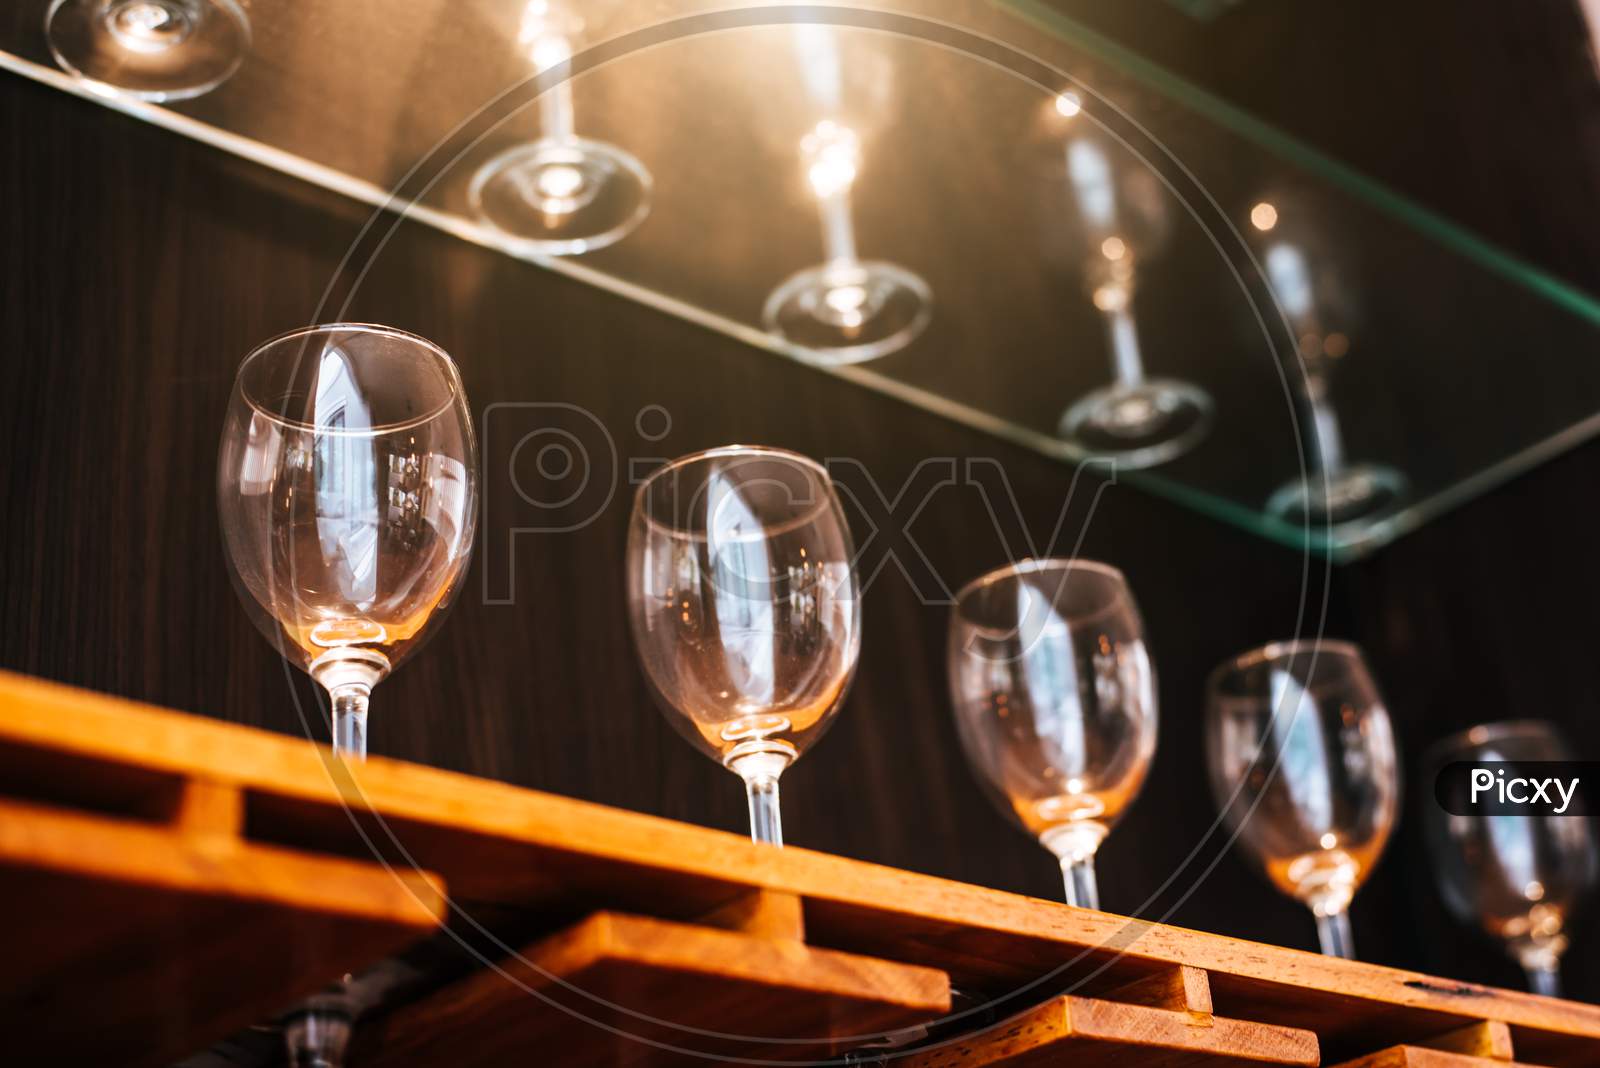 Drinking Wine Glasses Shelf In Restaurant With Lighting Showcase Background. Many Clean Containers In Restaurant Or Night Pub And Bar. Interior Decoration And Beverage Party Concept.